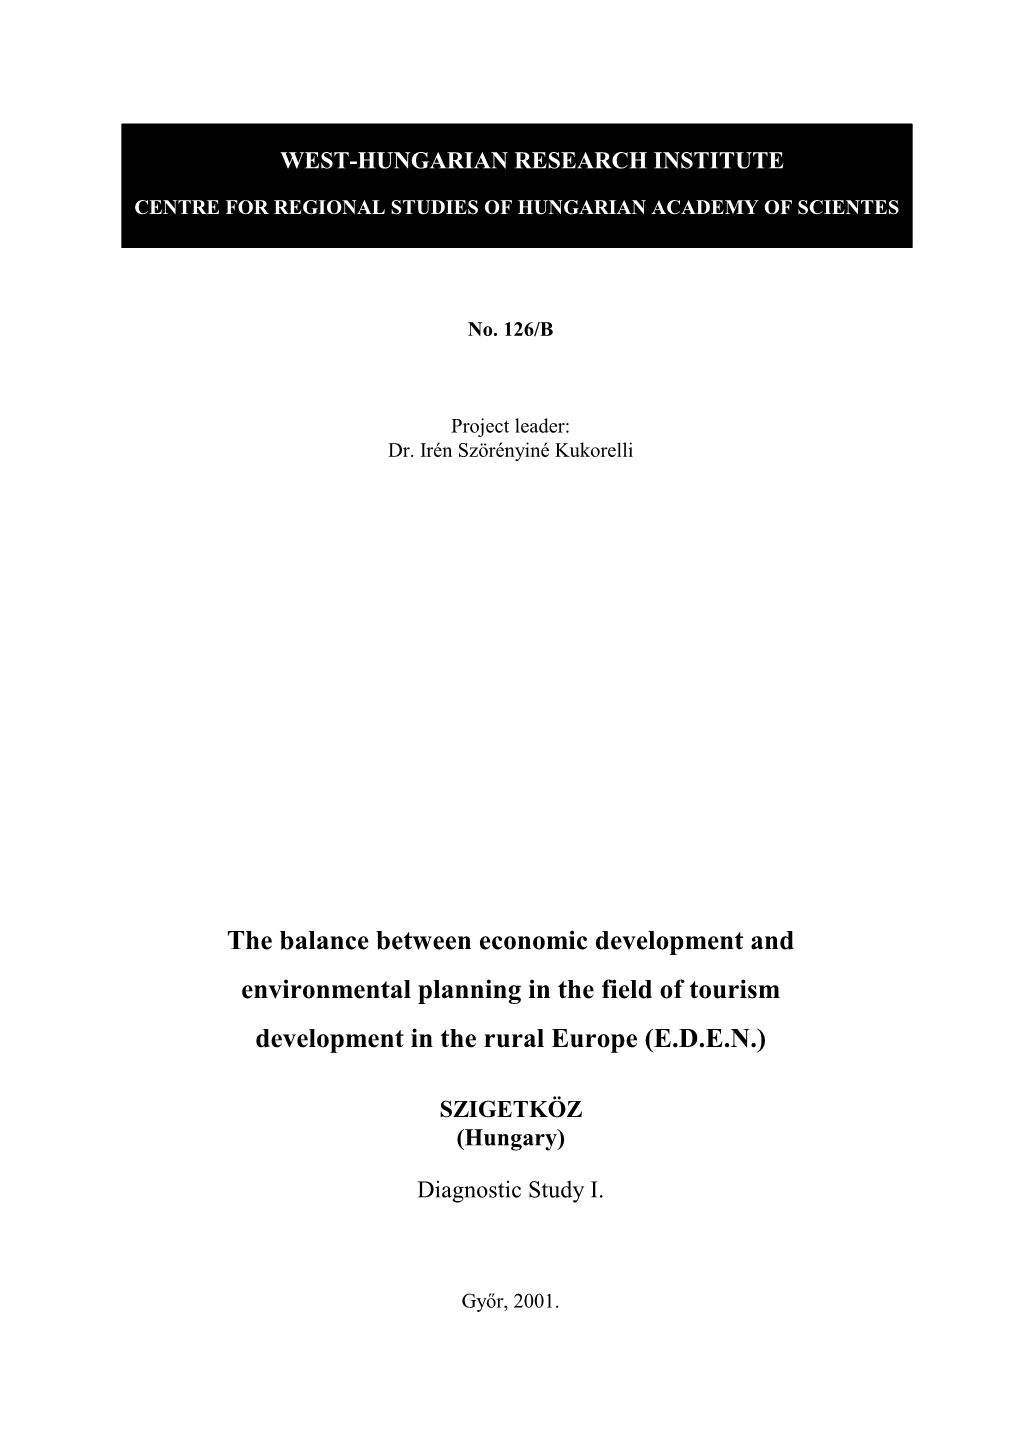 The Balance Between Economic Development and Environmental Planning in the Field of Tourism Development in the Rural Europe (E.D.E.N.)